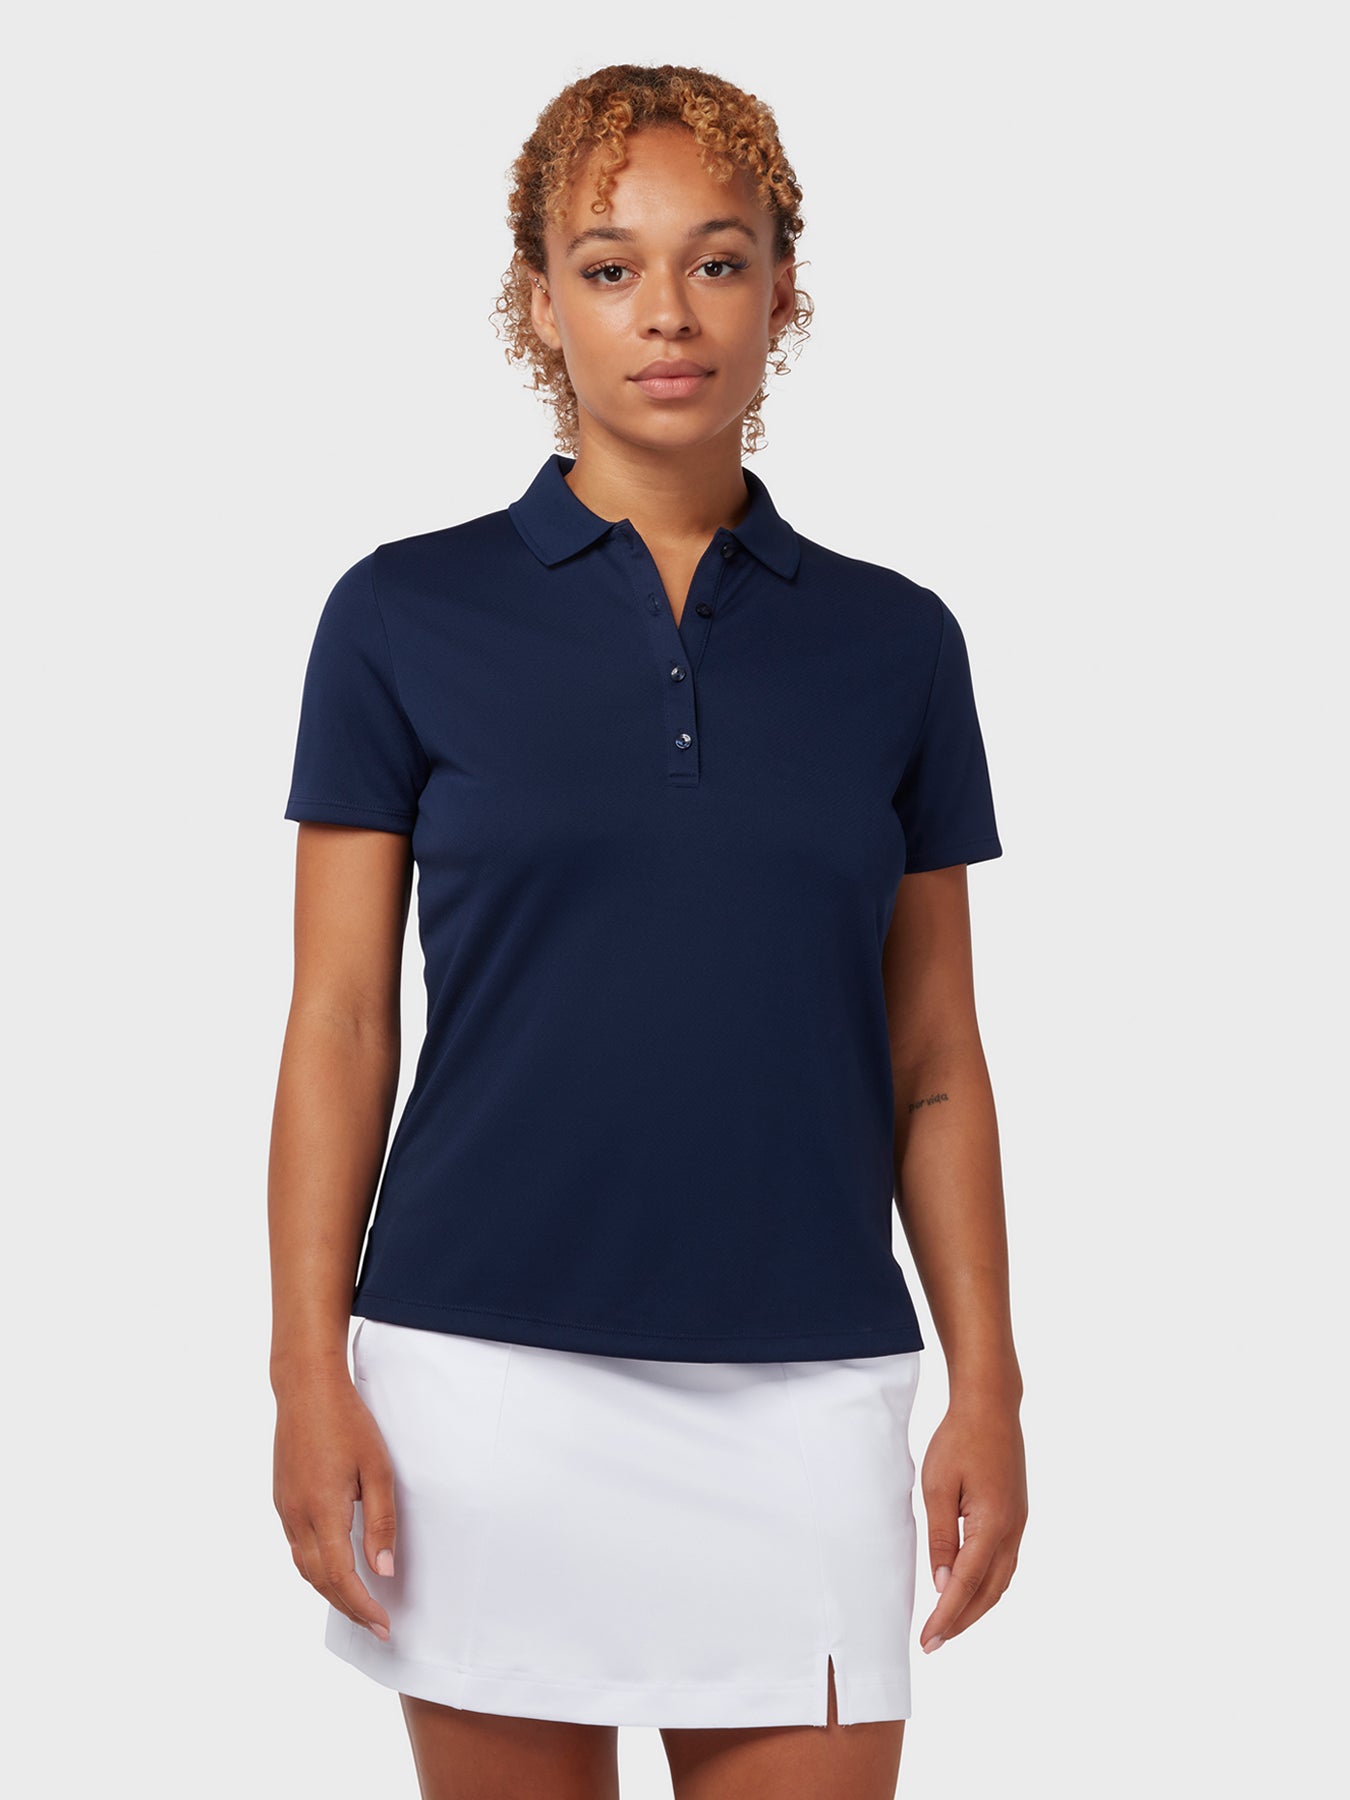 View Swing Tech Womens Polo In Peacoat Peacoat M information